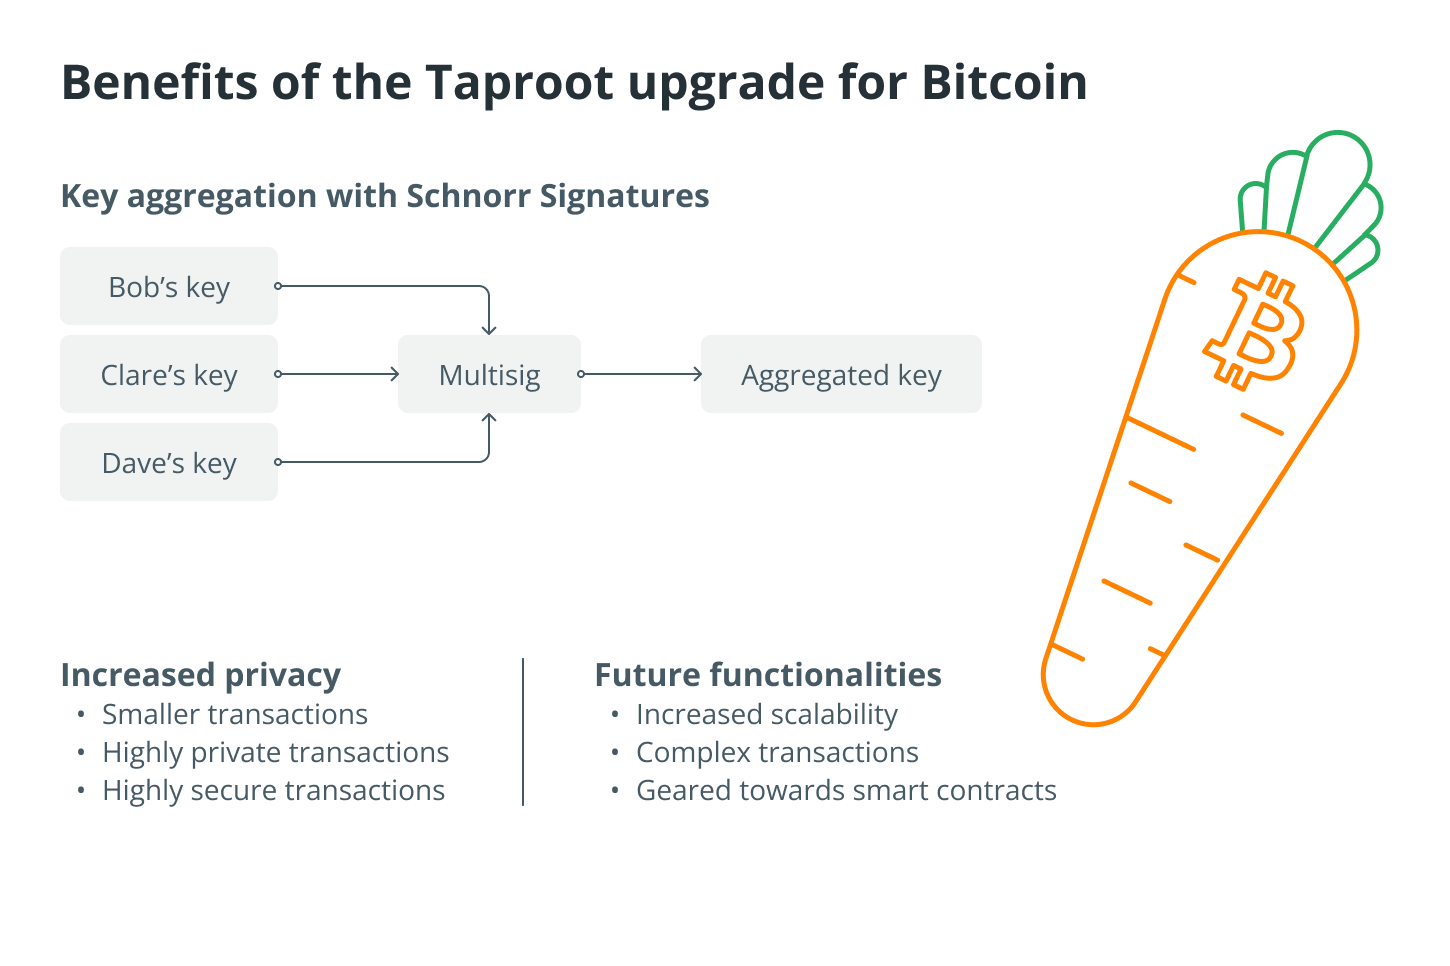 Taproot Upgrade: What are the benefits of implementation?